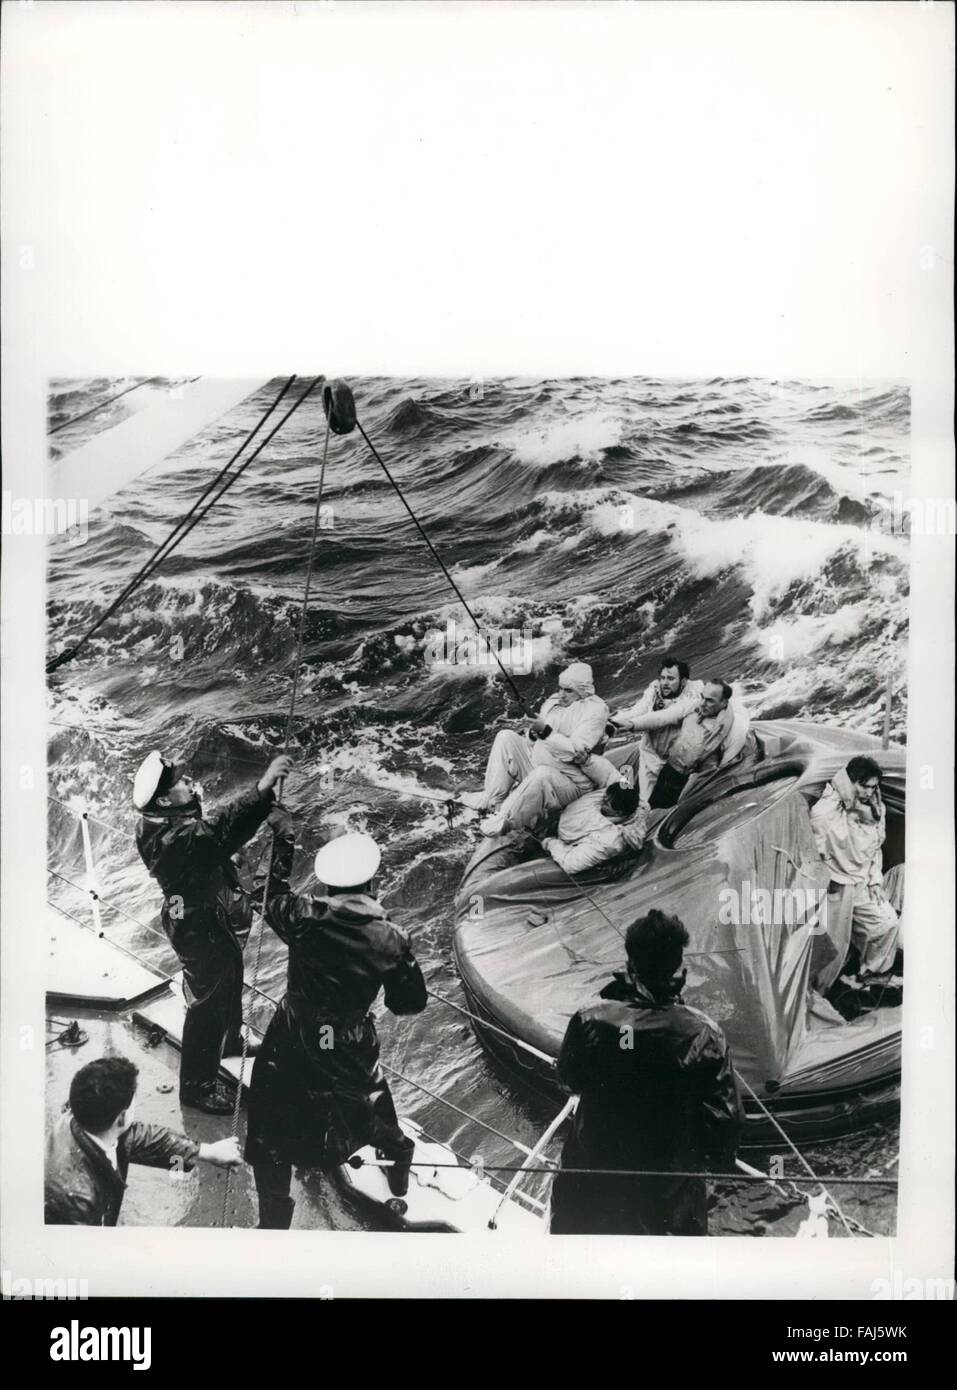 1962 - British Official Photograph-Admiralty. Issued by Central Office of Information.: Rough Seas Foil Atlantic Survival Tests.: Two groups of Naval Volunteers had a really rough time in the Atlantic over the week-end when the Ocean turned its vicious worst on five-day survival tests from the destroyer ''Carron''. The first group entered the water on Saturday - and had to be fished out ninety minutes later - when their raft was made unseaworthy by the battering seas. On the Sunday a second crew entered the water aboard an Oval cabopied Admiralty-type raft - which survived the battering water Stock Photo